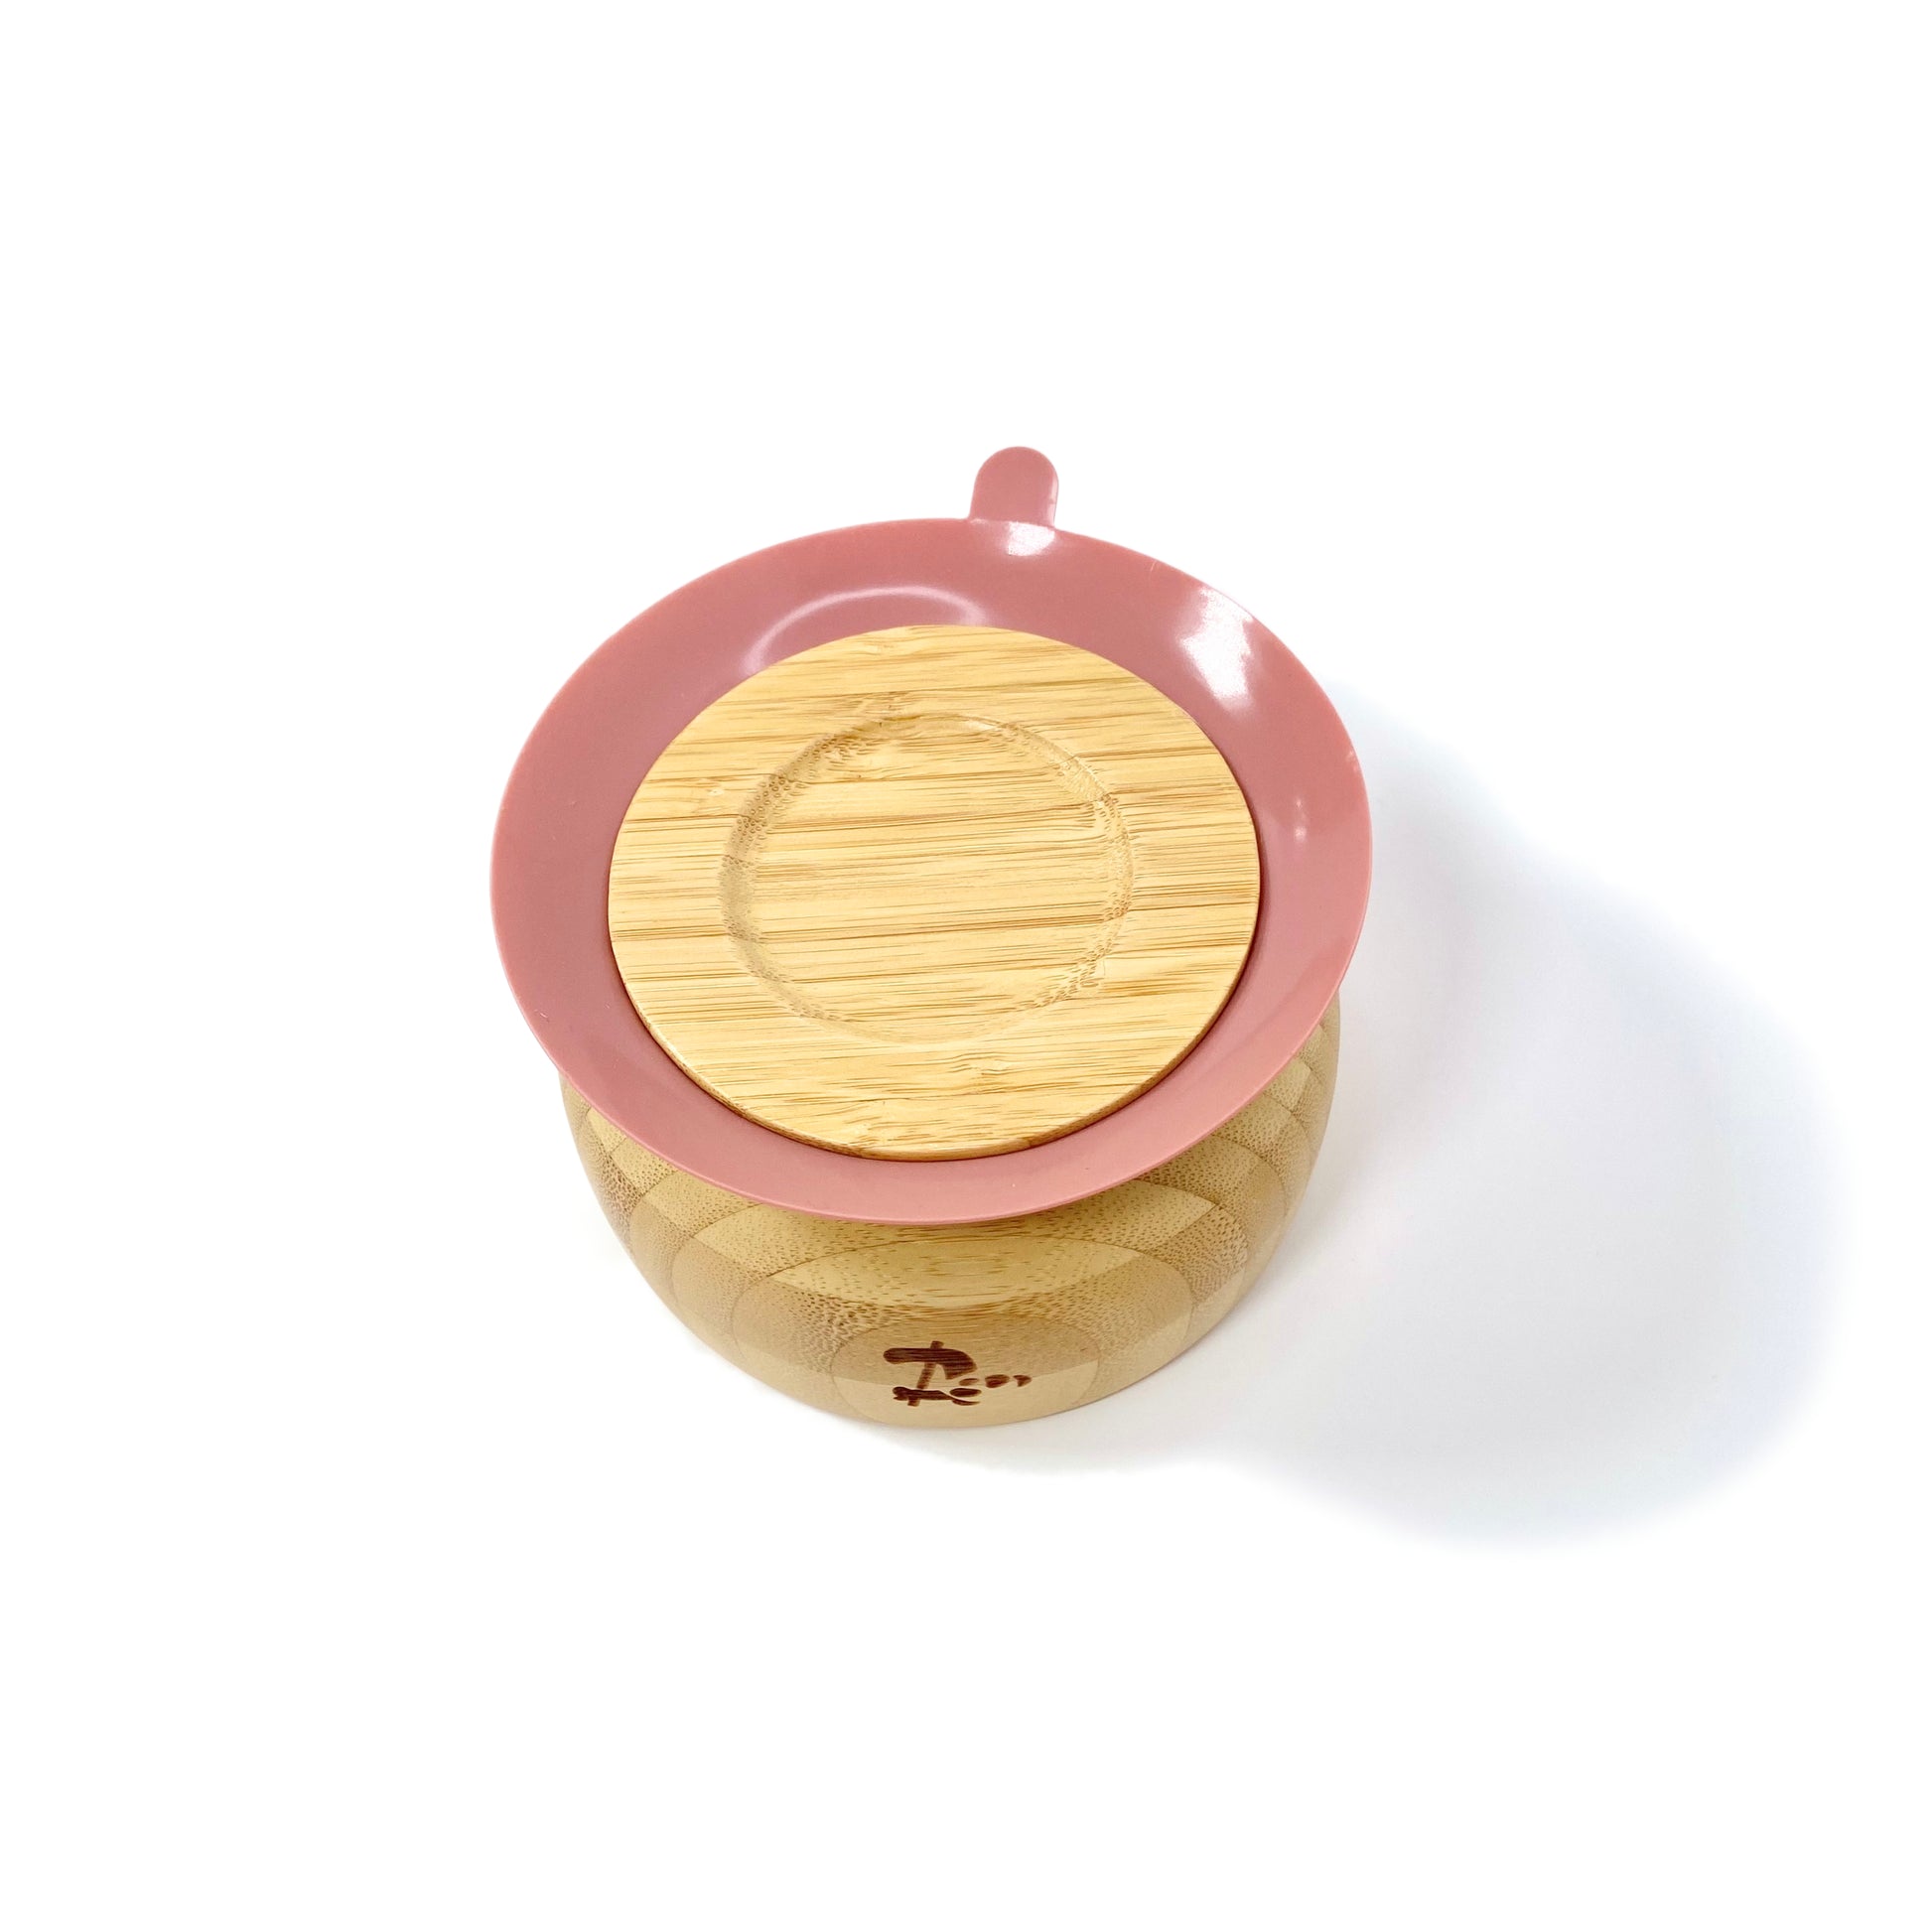 A children’s bamboo bowl with a blush pink silicone suction ring. Image shows the underside of the bowl, featuring the silicone suction ring.